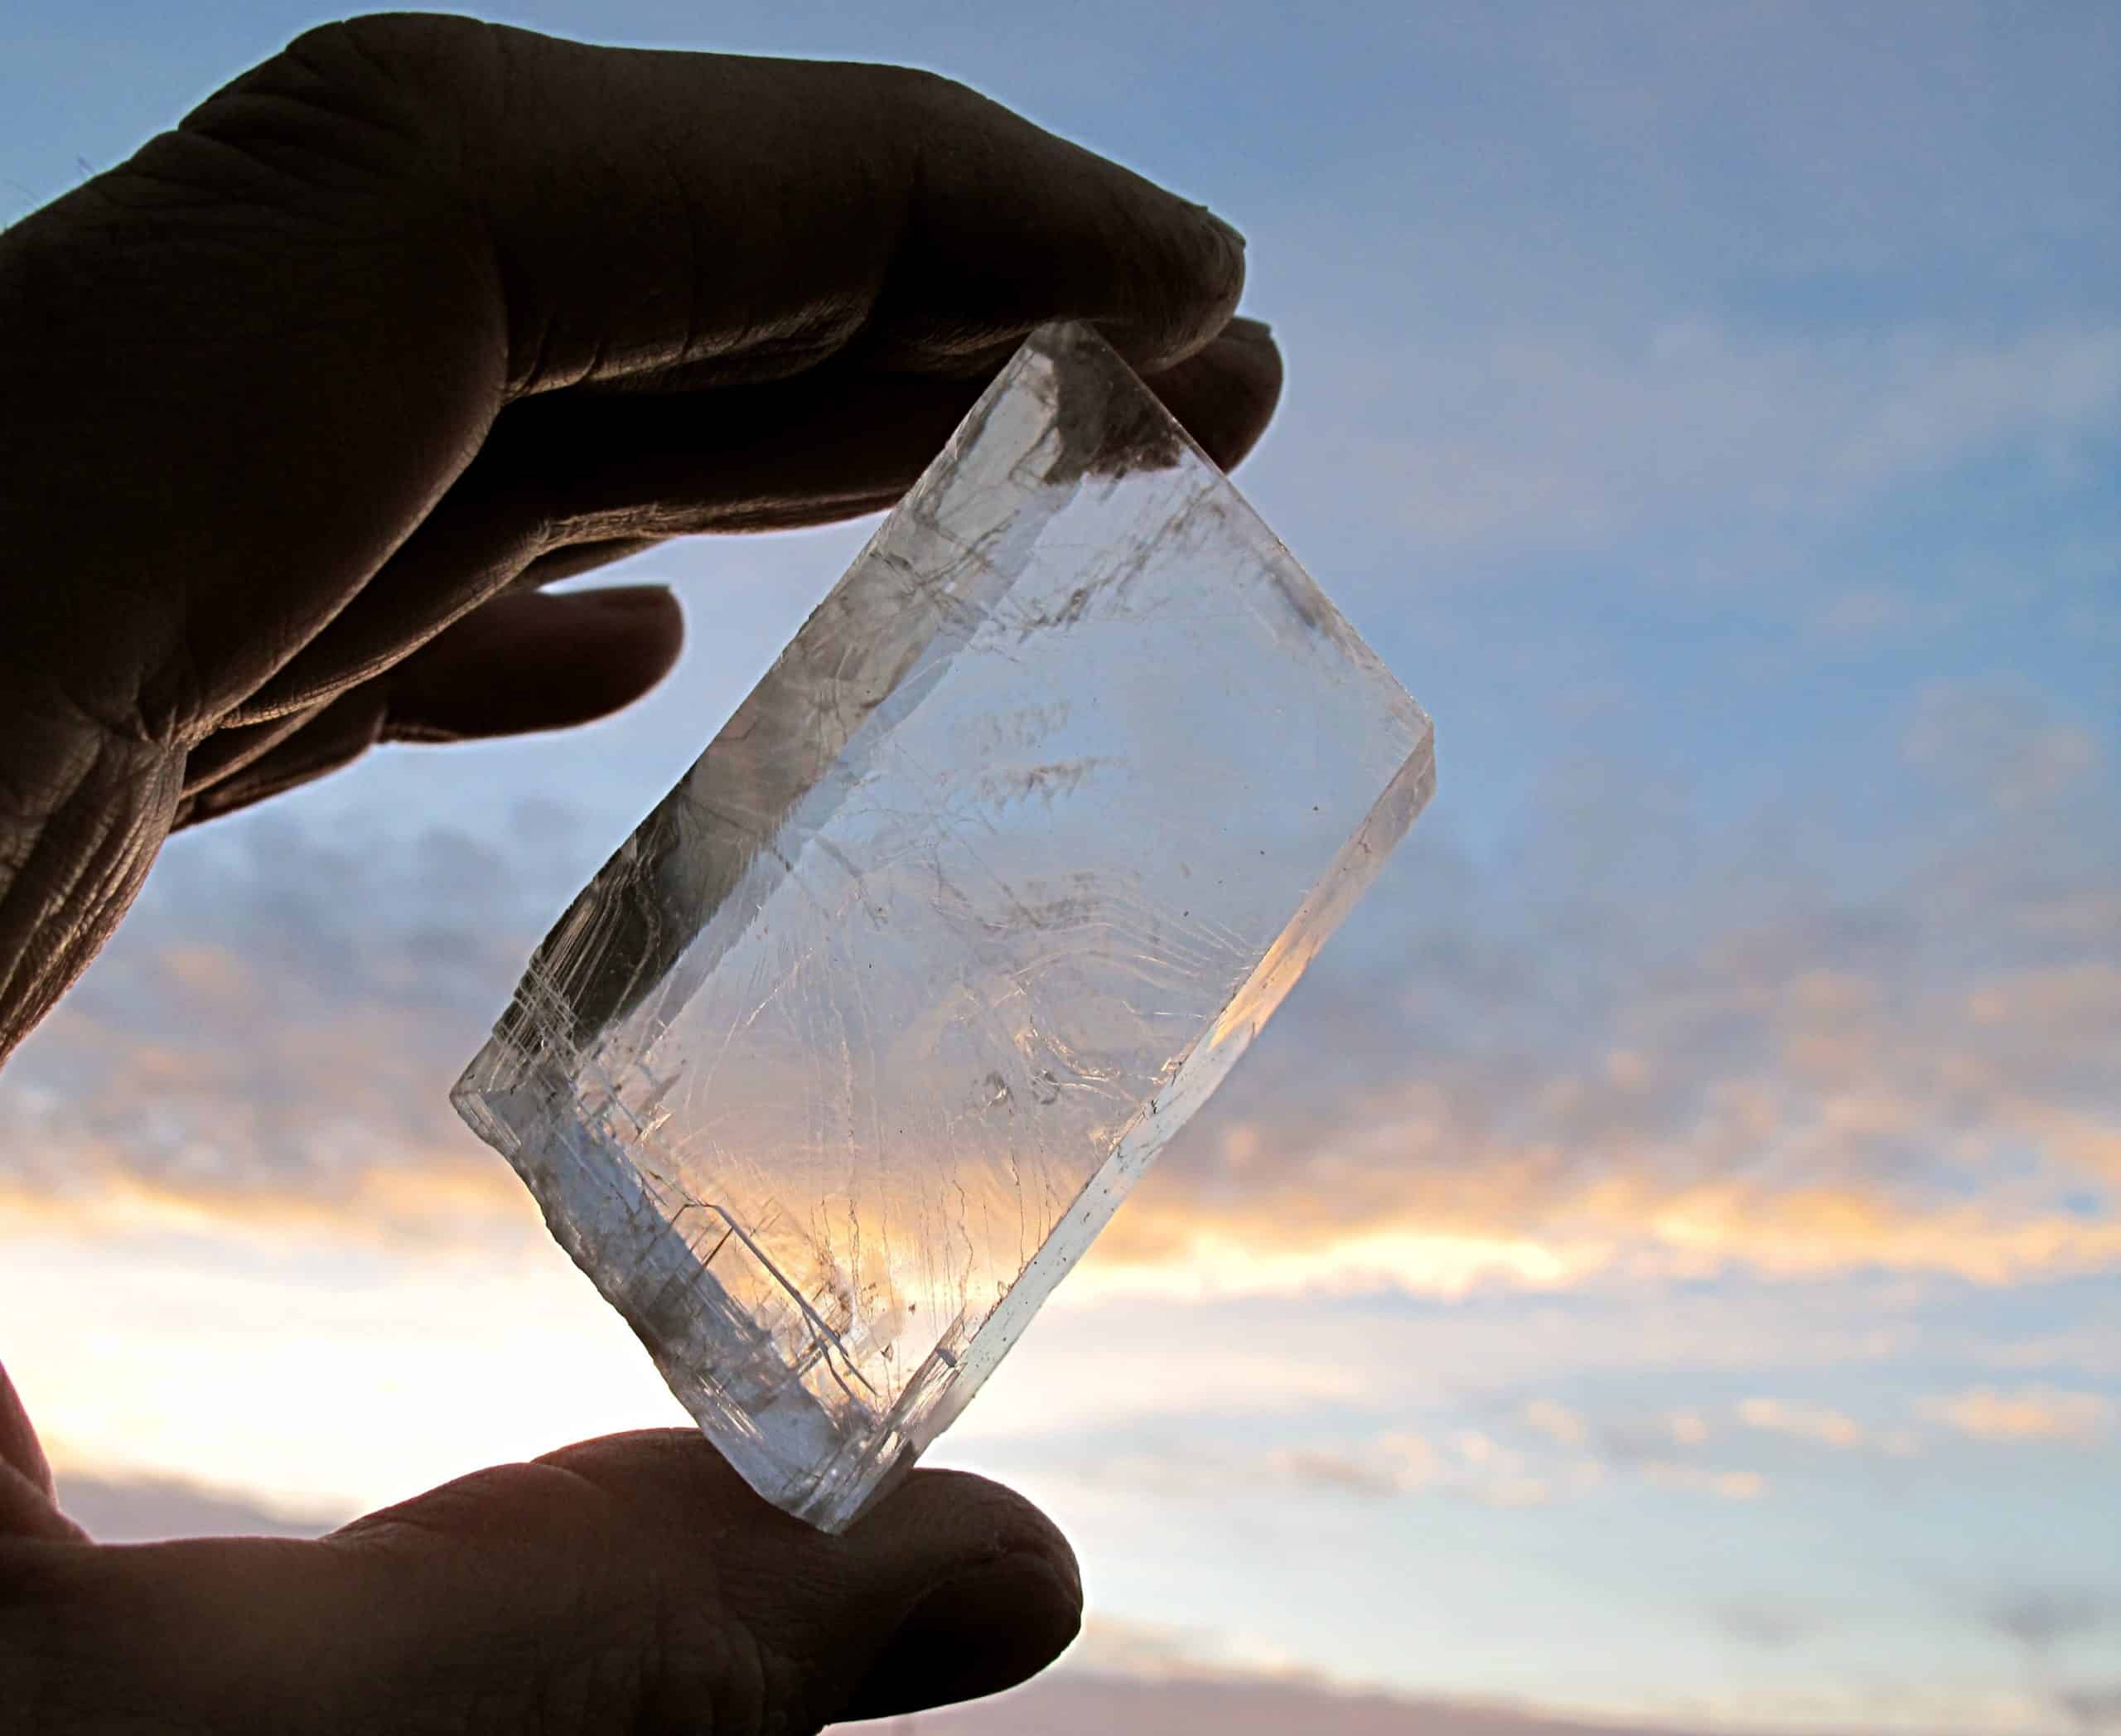 Is Iceland Spar your national crystal? Is it a popular product in Icelandic gift shops?